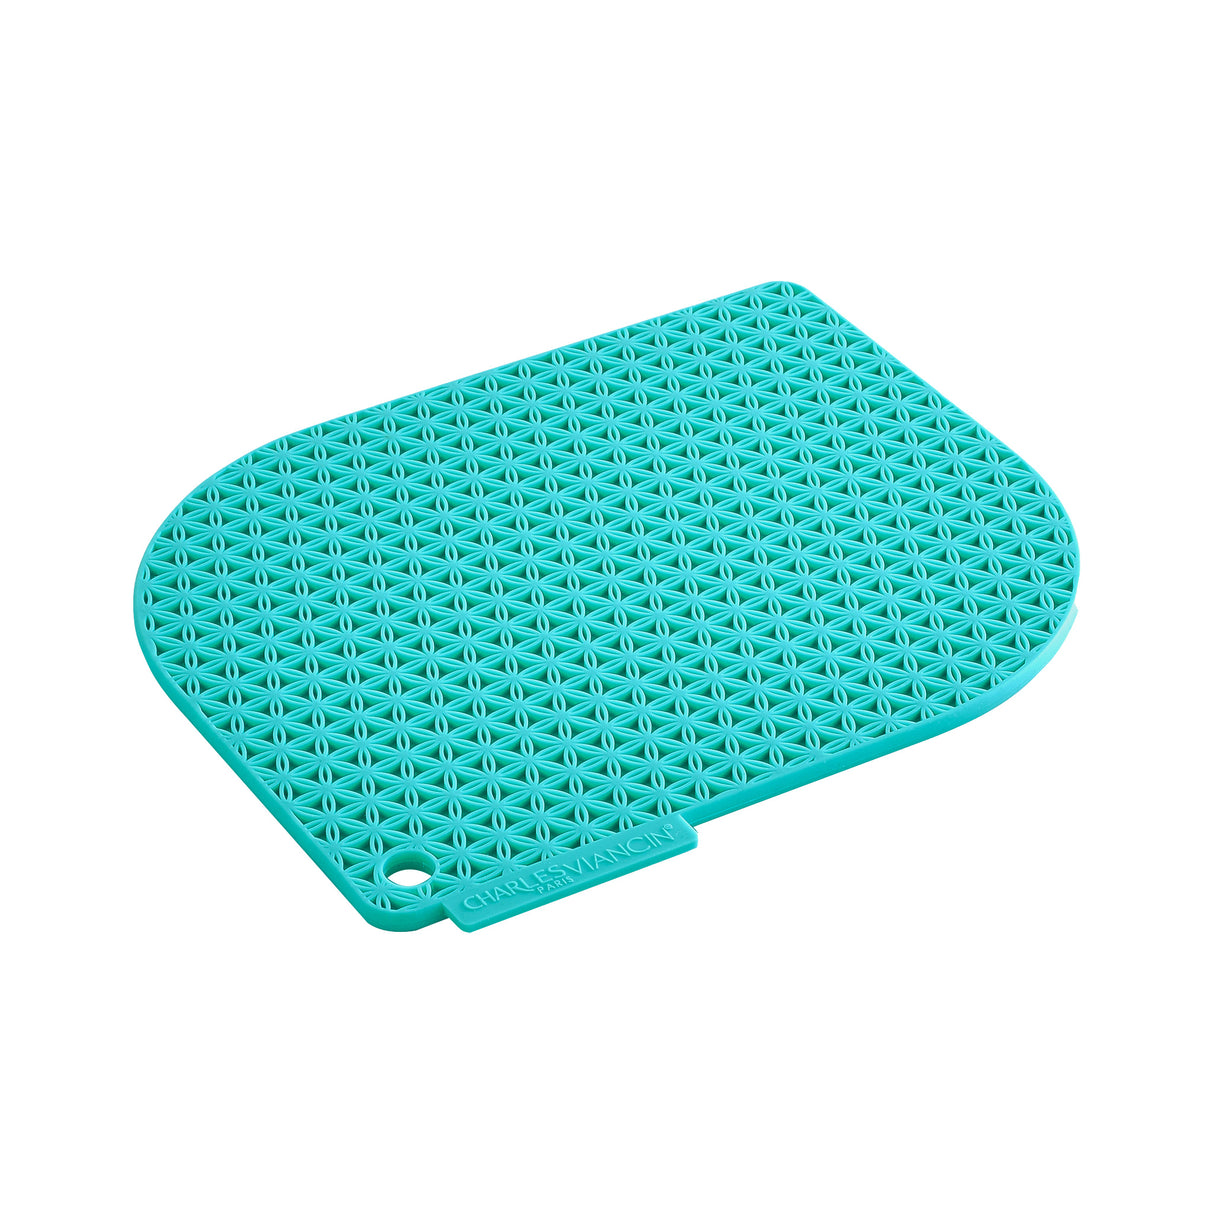 CHARLES-VIANCIN-1703-HONEYCOMB-POT-HOLDER-TURQUOISE-SILICONE-3-4.jpg